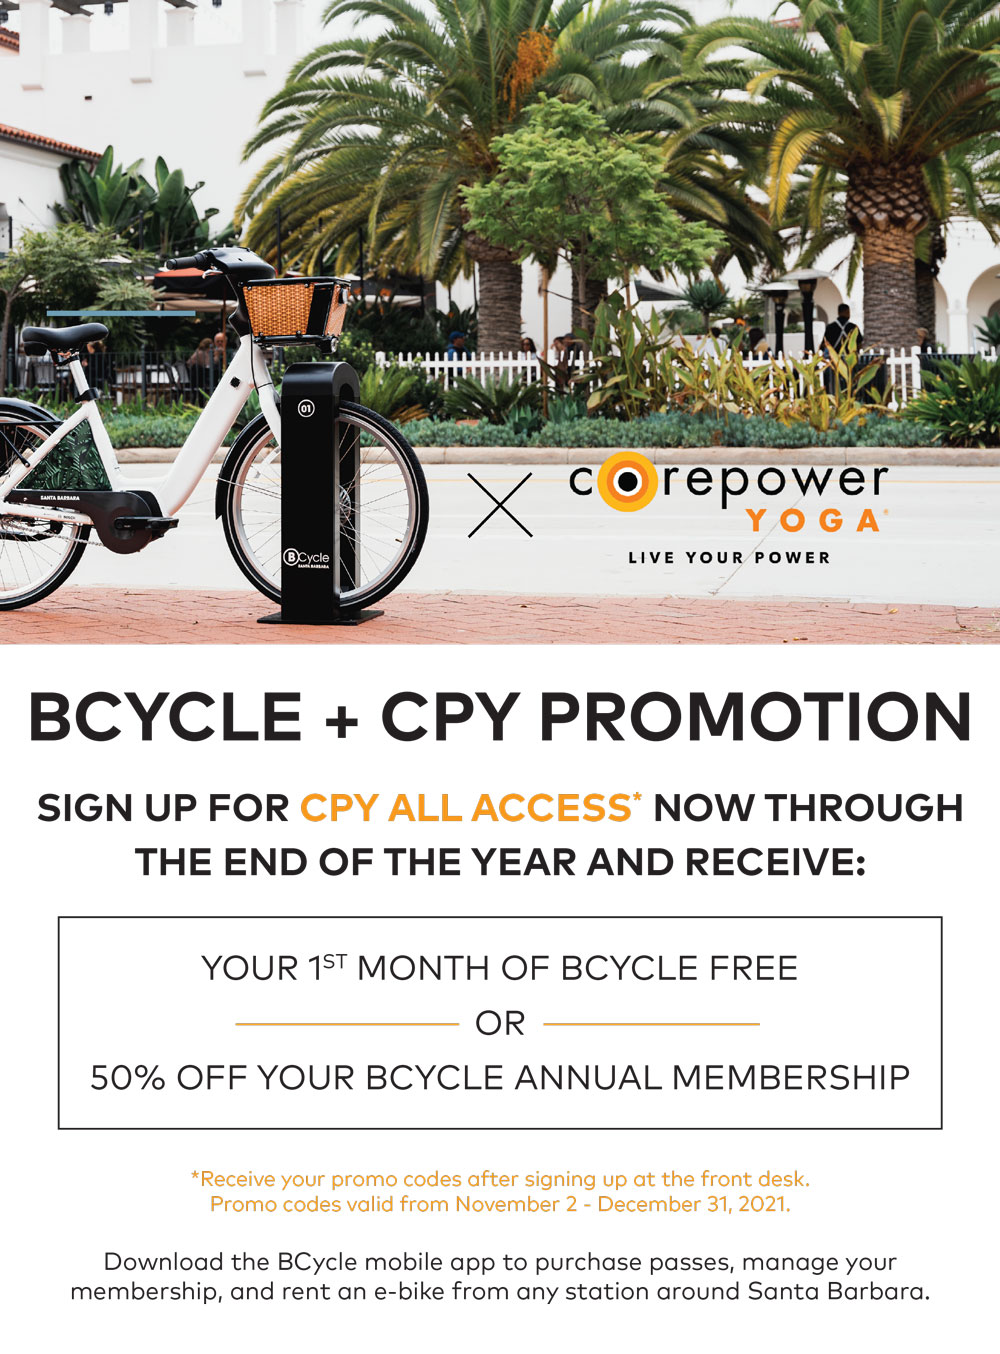 Free month or 50 percent off an annual promotion with cpy all access pass